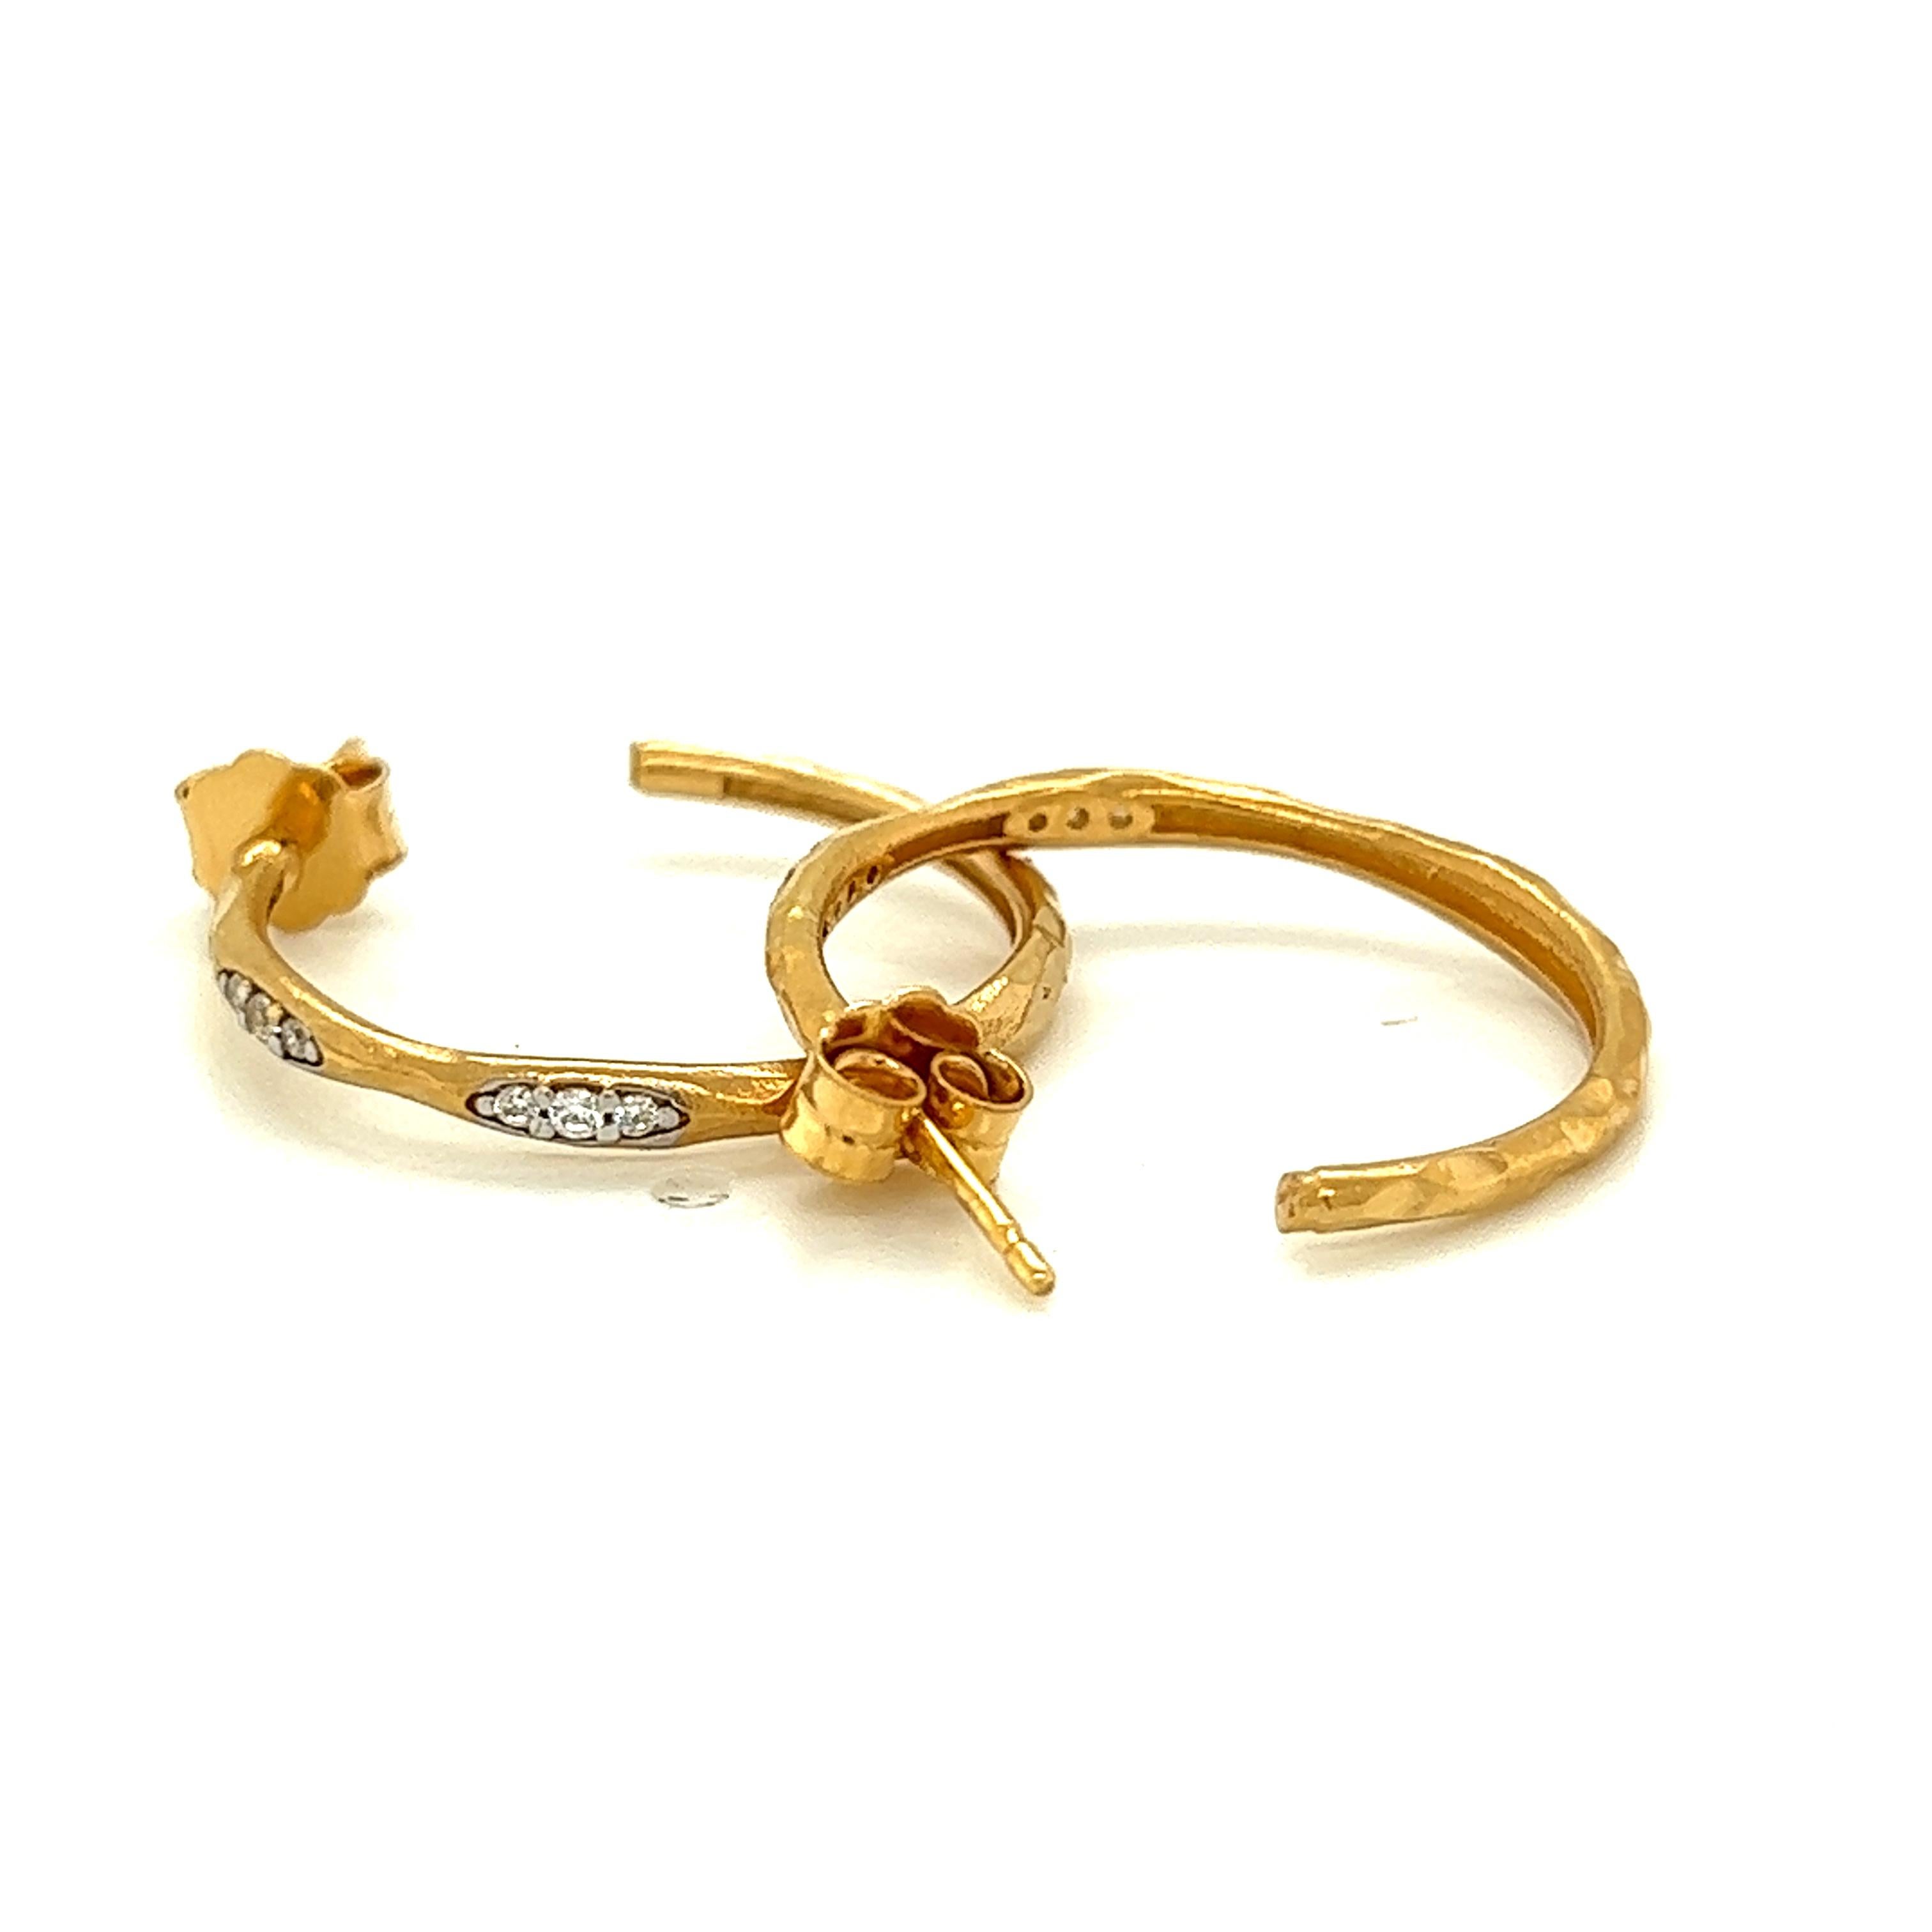 14 Karat Yellow Gold Hand-Crafted Matte and Hammer-Finished 22mm Hoop Earrings, Set with 0.10 Carat Diamonds and a Post-with-Safety Closure.
